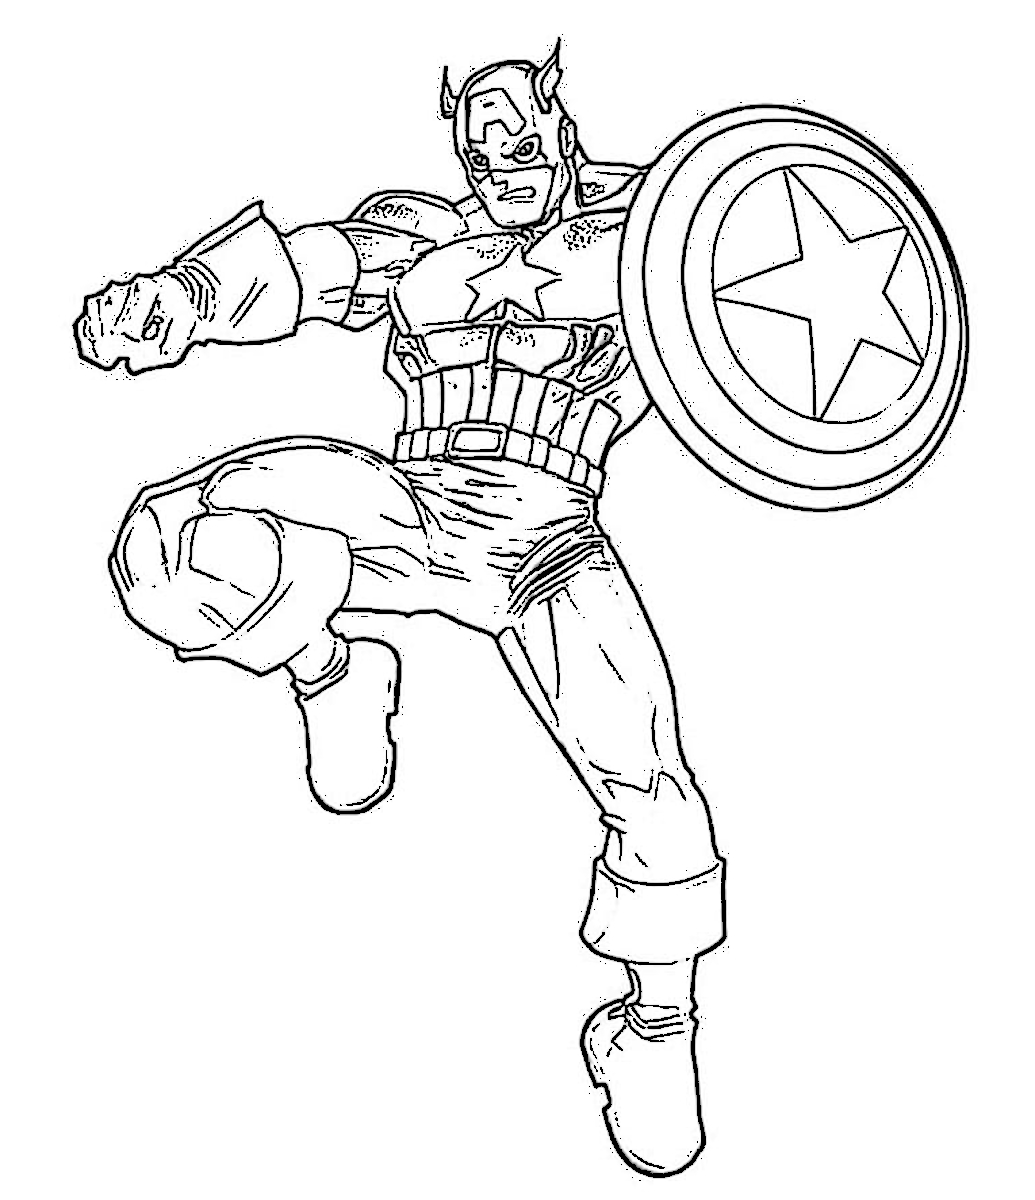 Avengers 48  coloring page to print and coloring